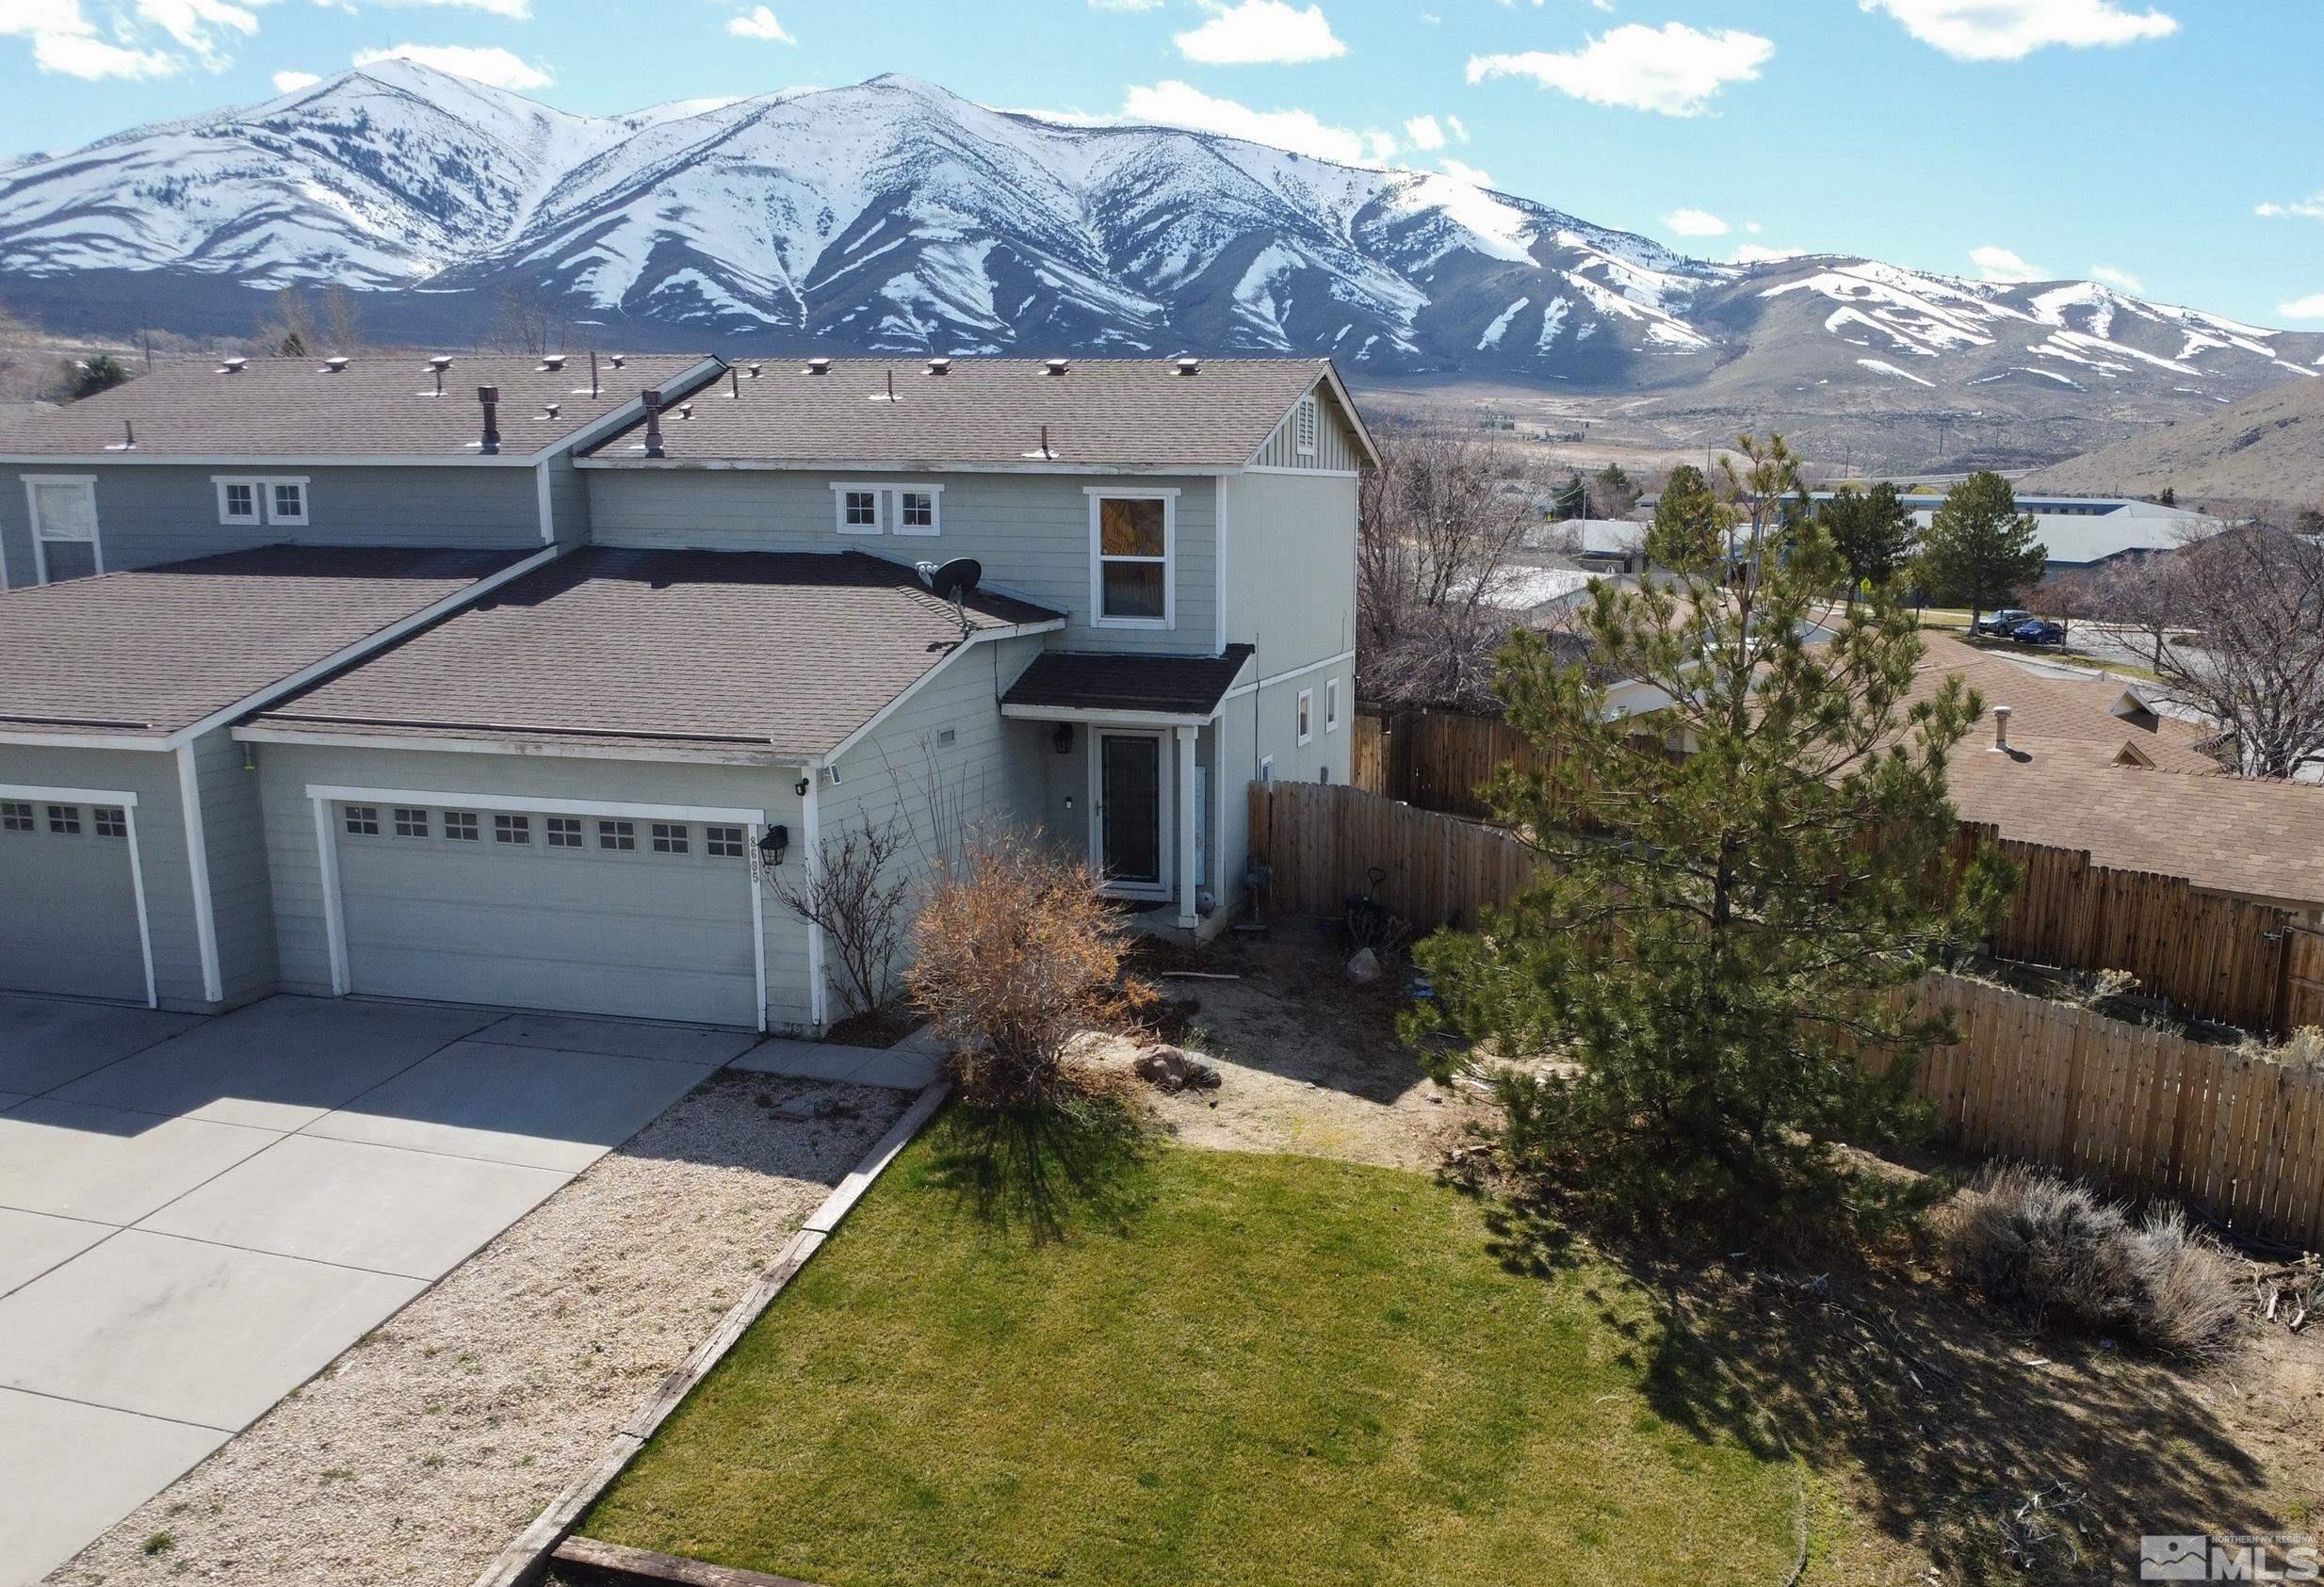 a aerial view of a house with a yard and mountain view in back